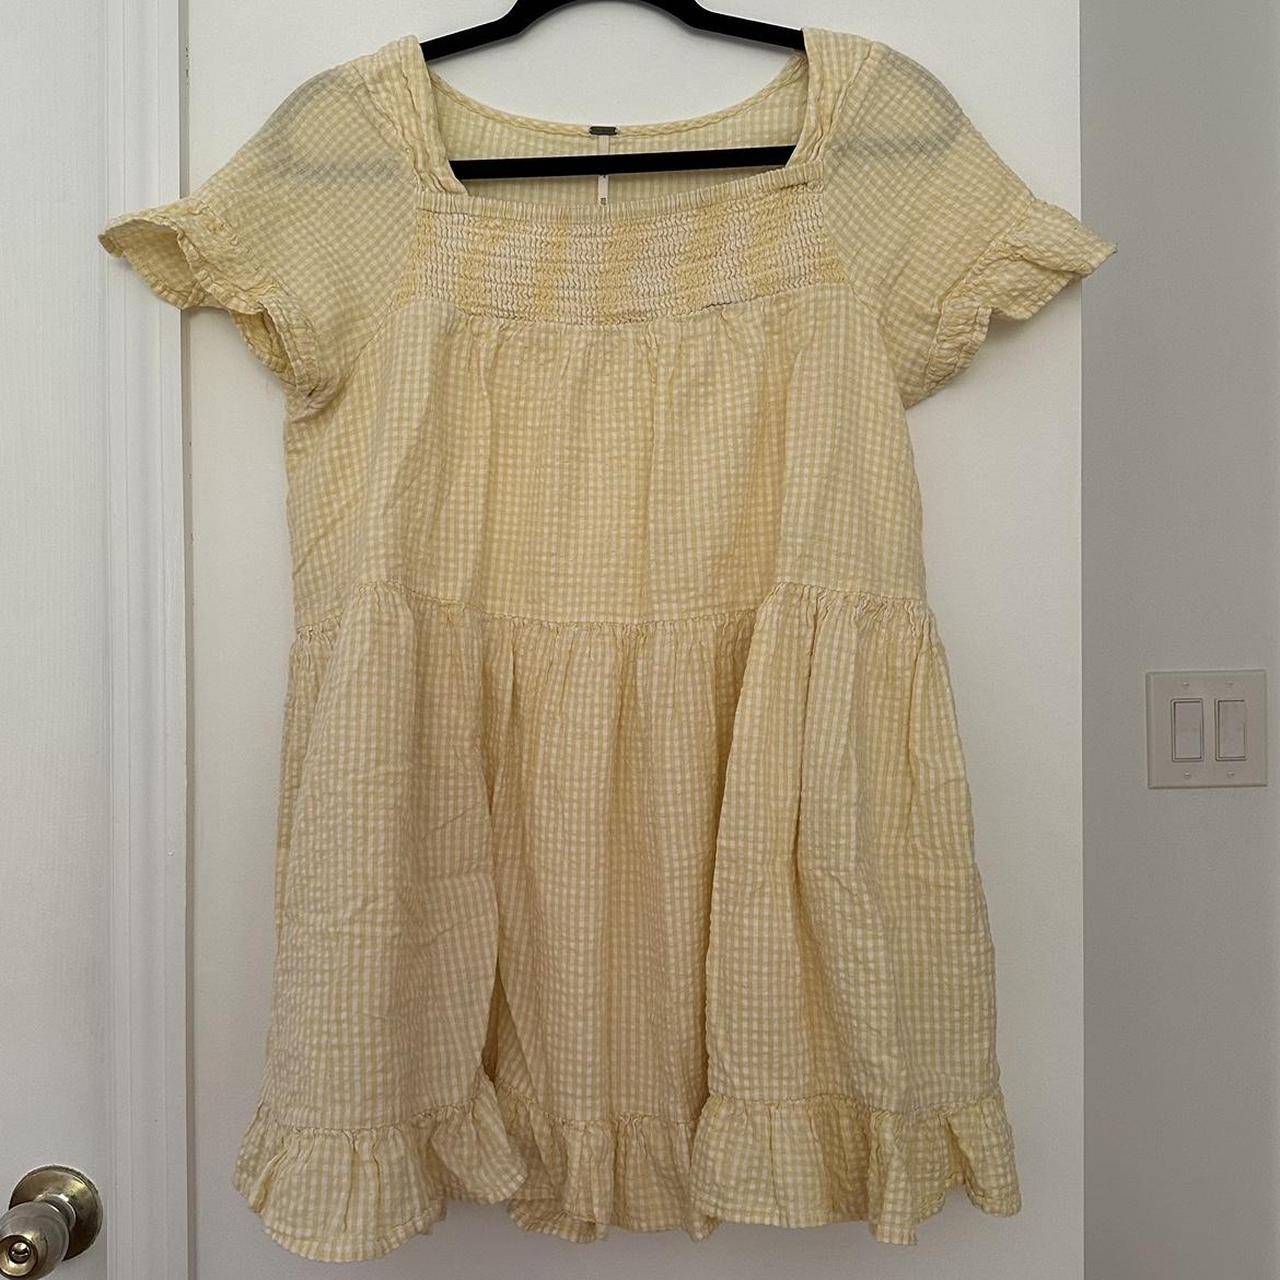 Free People Women's Yellow and White Dress | Depop